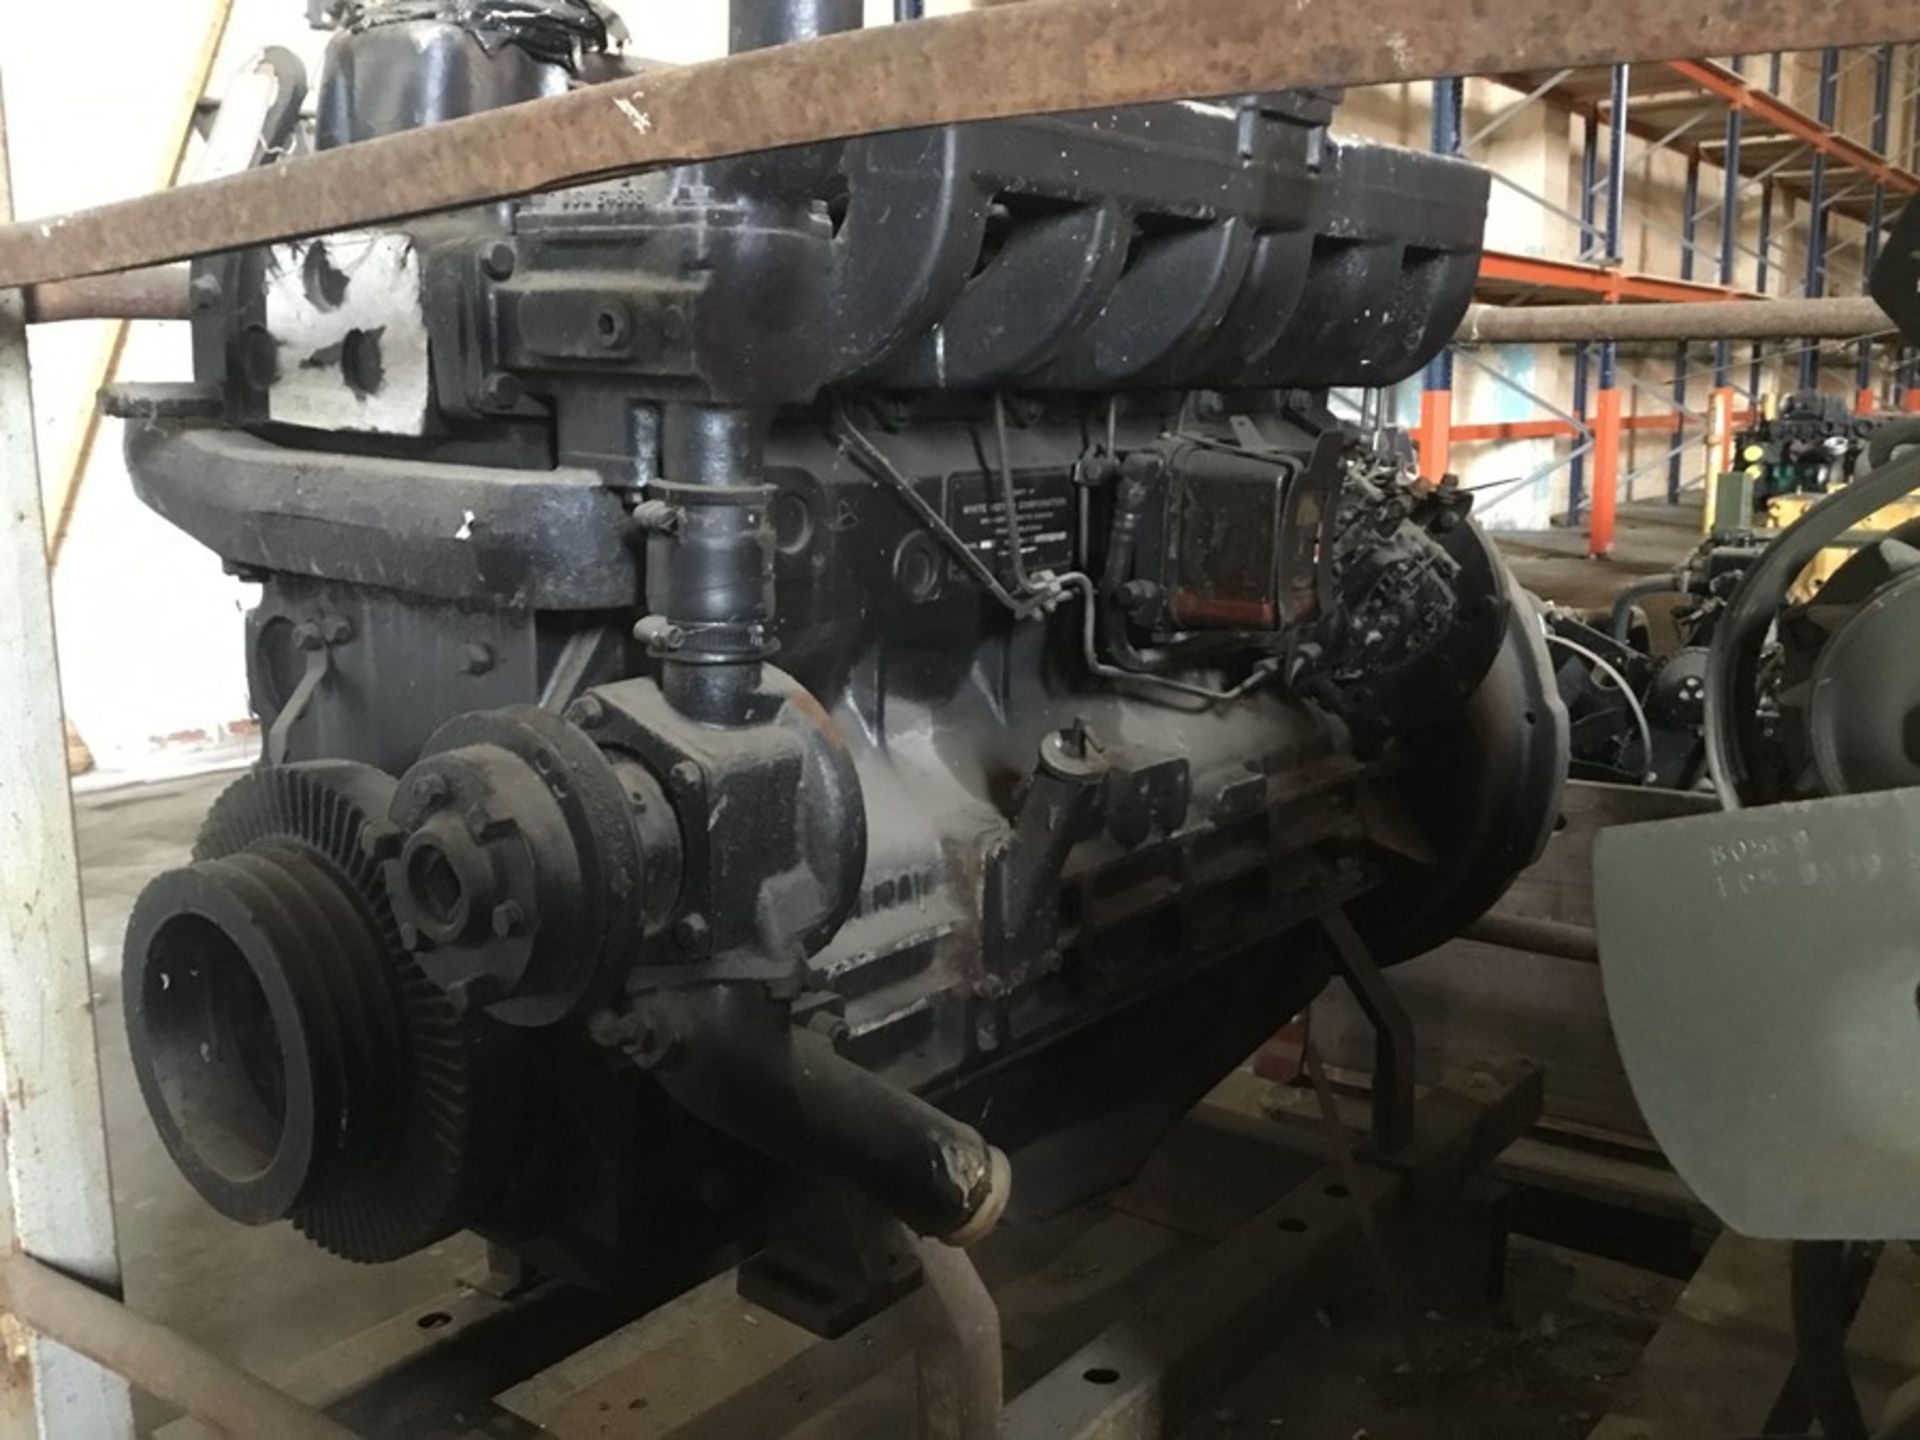 Diesel engine: Whites Motor company D4300 6cyl Non turbo Serial 4300-01 - Image 2 of 21